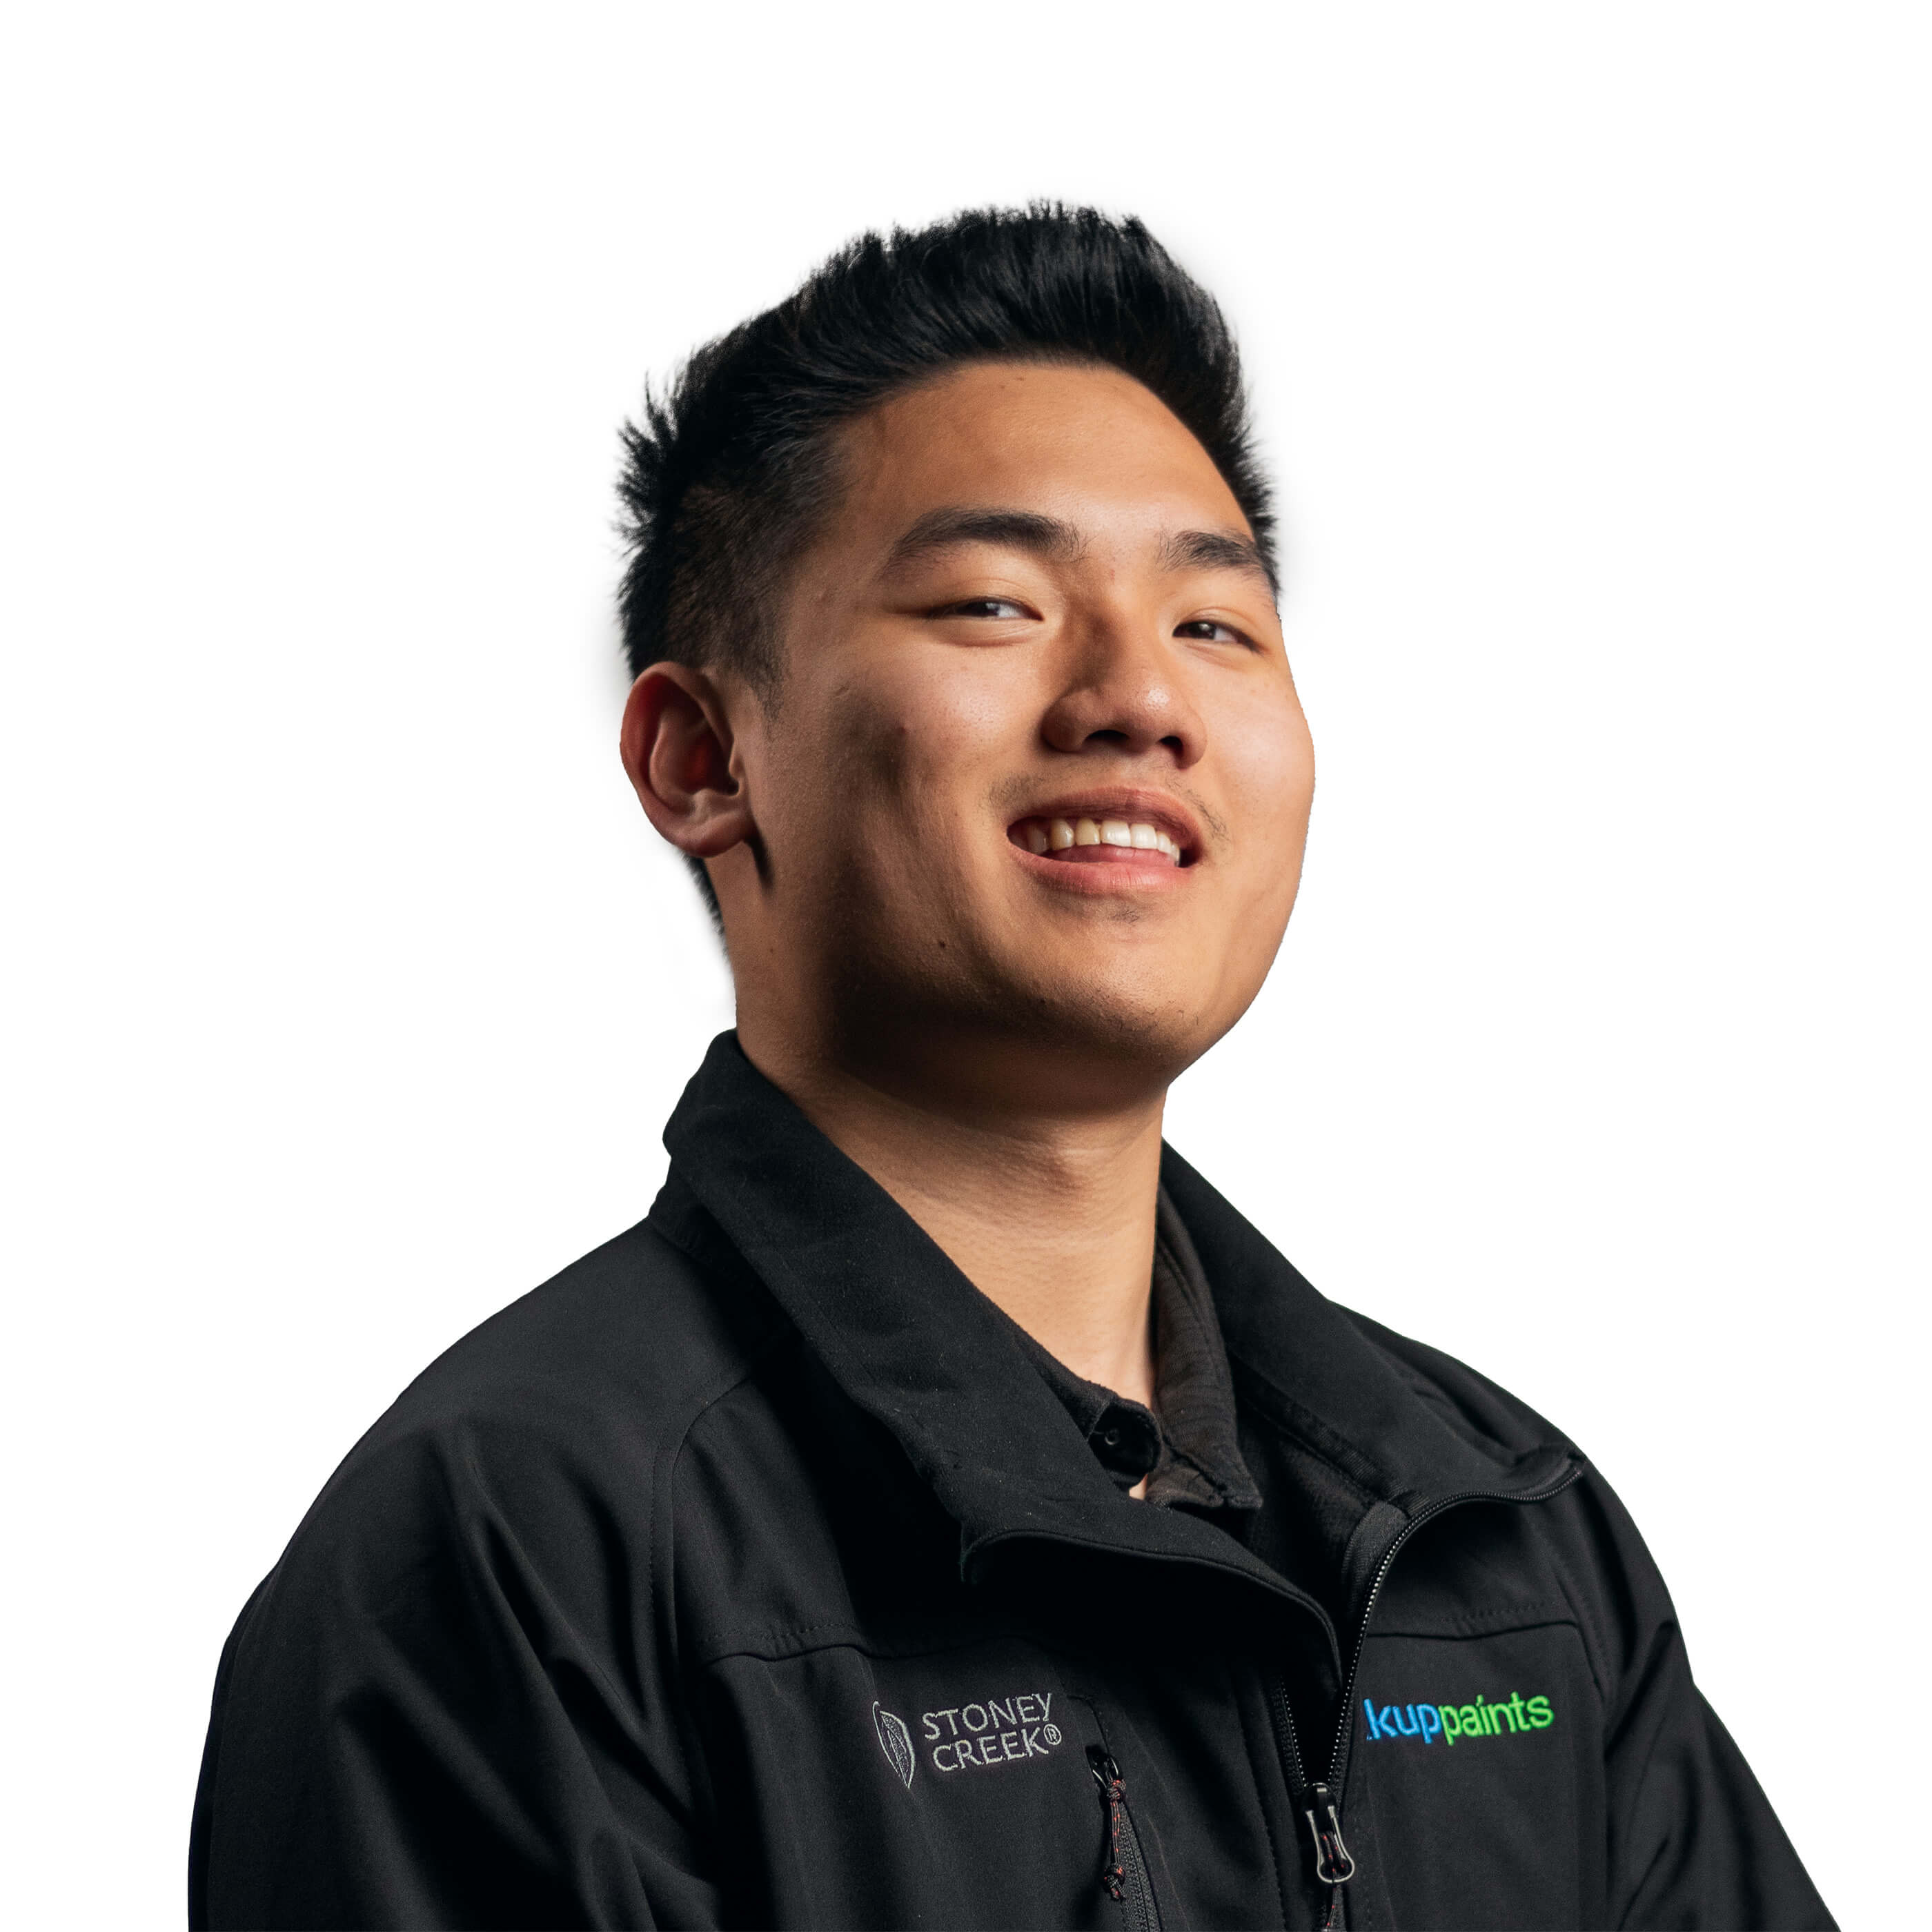 Alternate Staff Photo of Alfred Zhang - Colourist